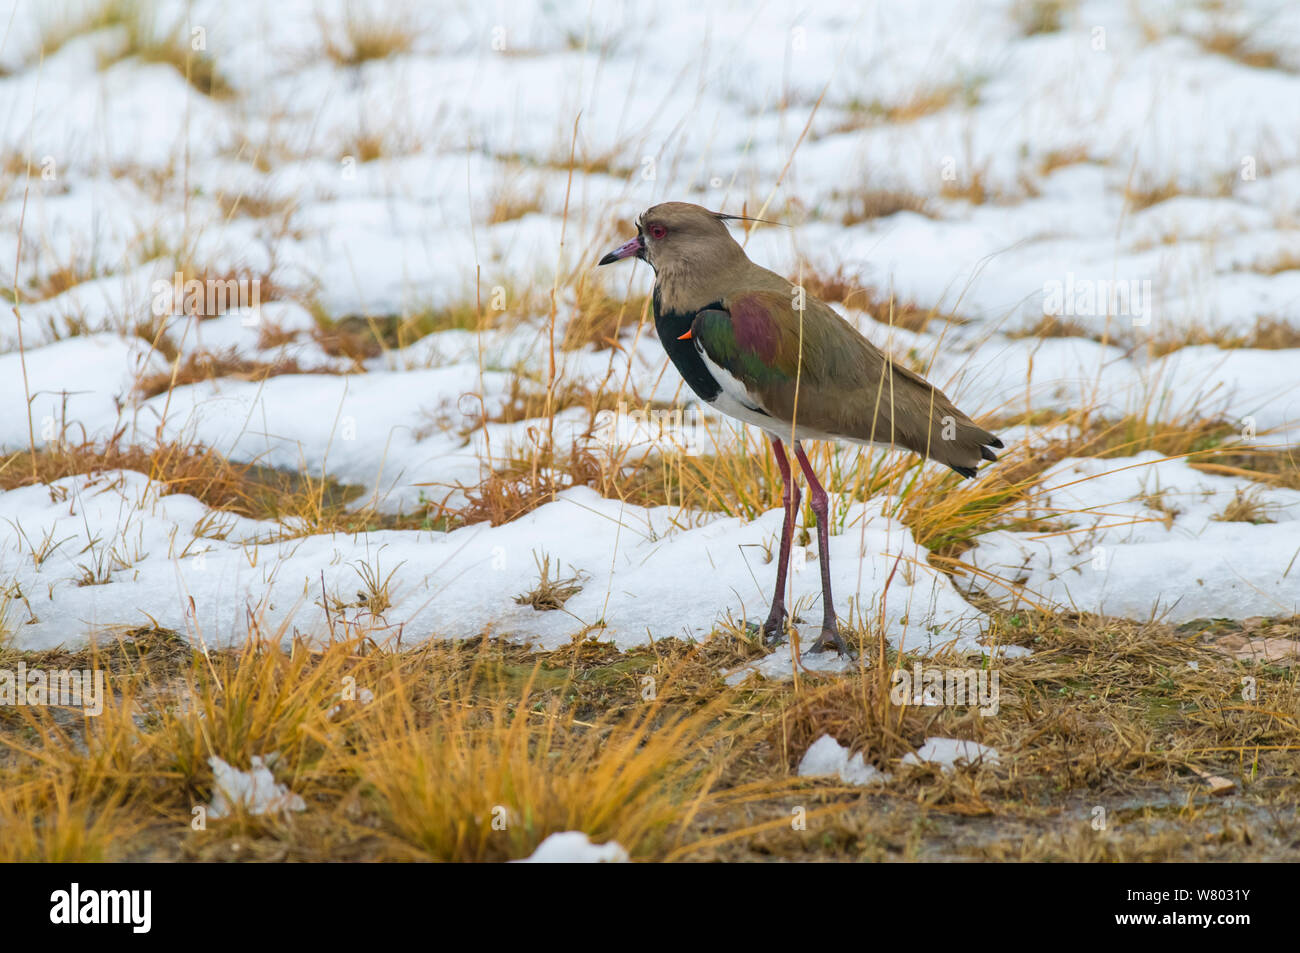 Southern lapwing (Vanellus chilensis) in with spur on its wing, in snowy grassland, La Pampa , Argentina Stock Photo